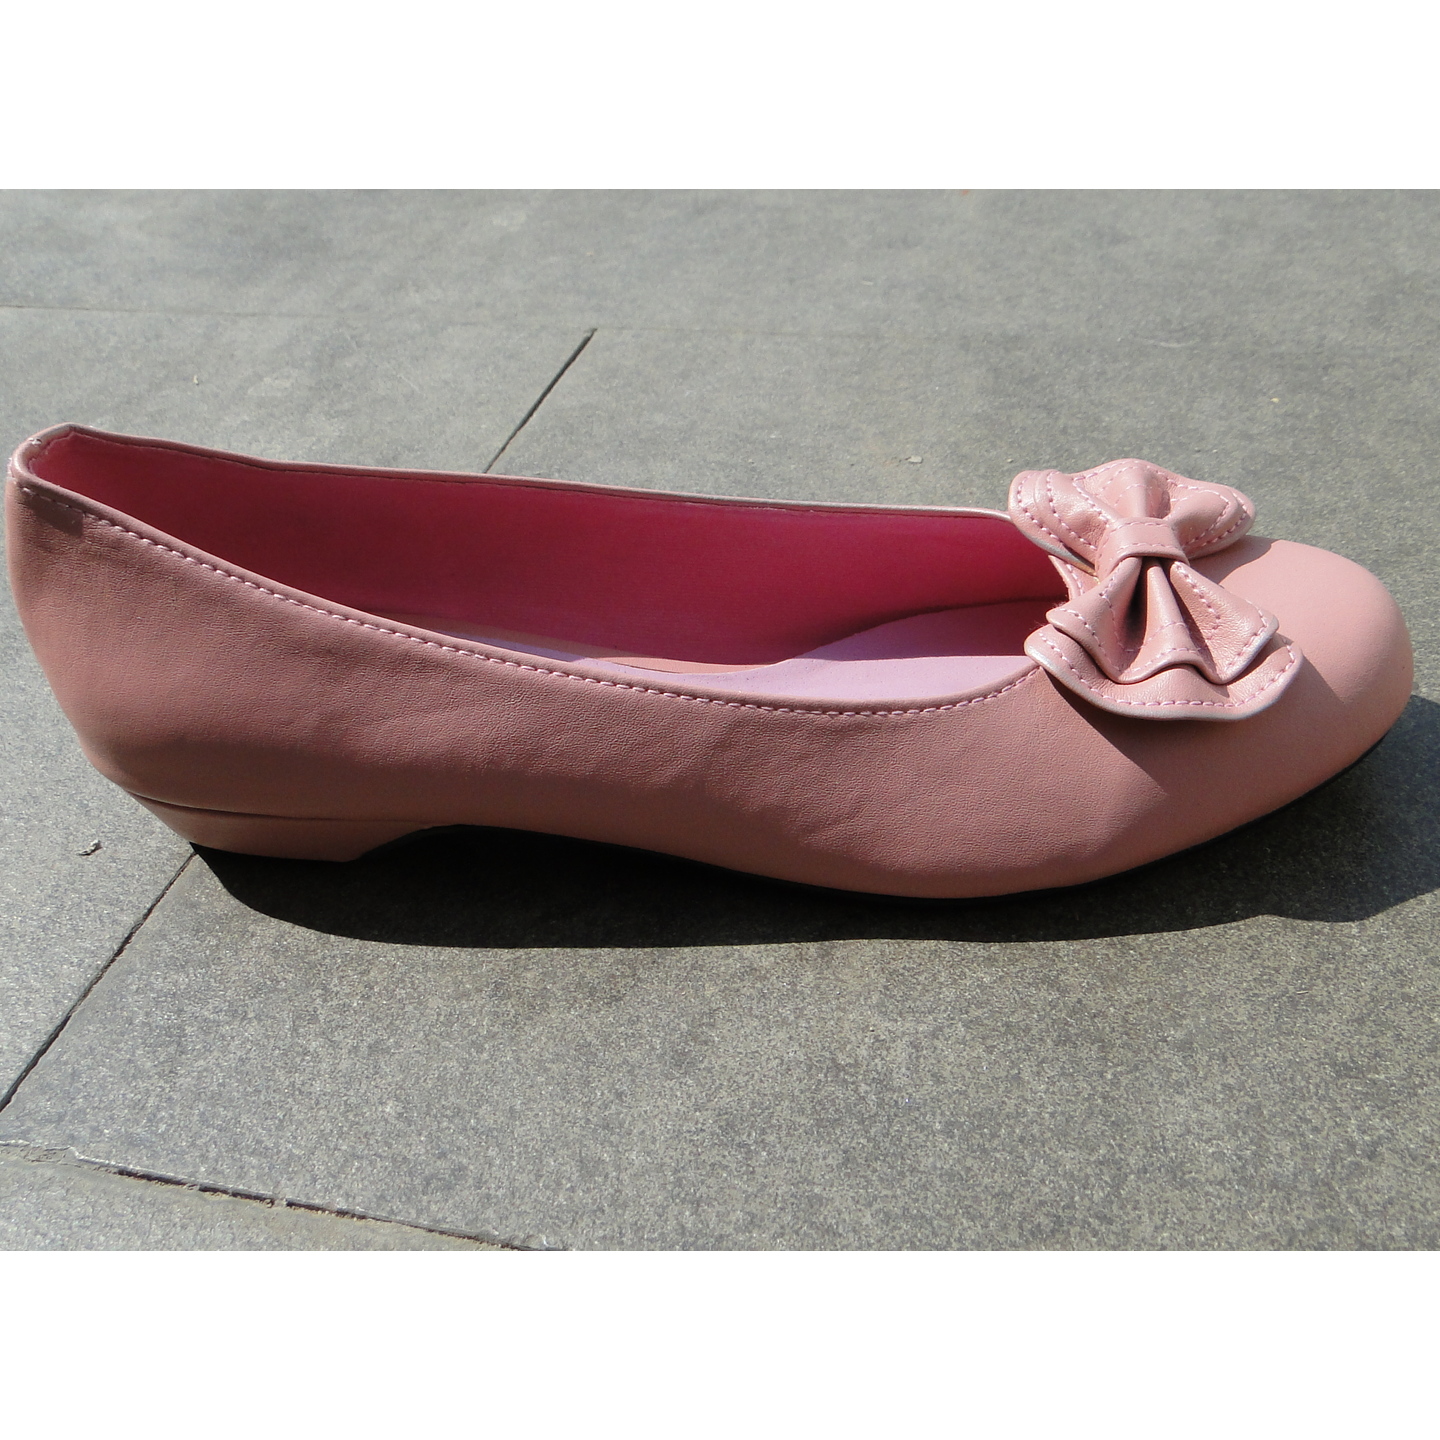 Rose Pink Ballerina with Bow